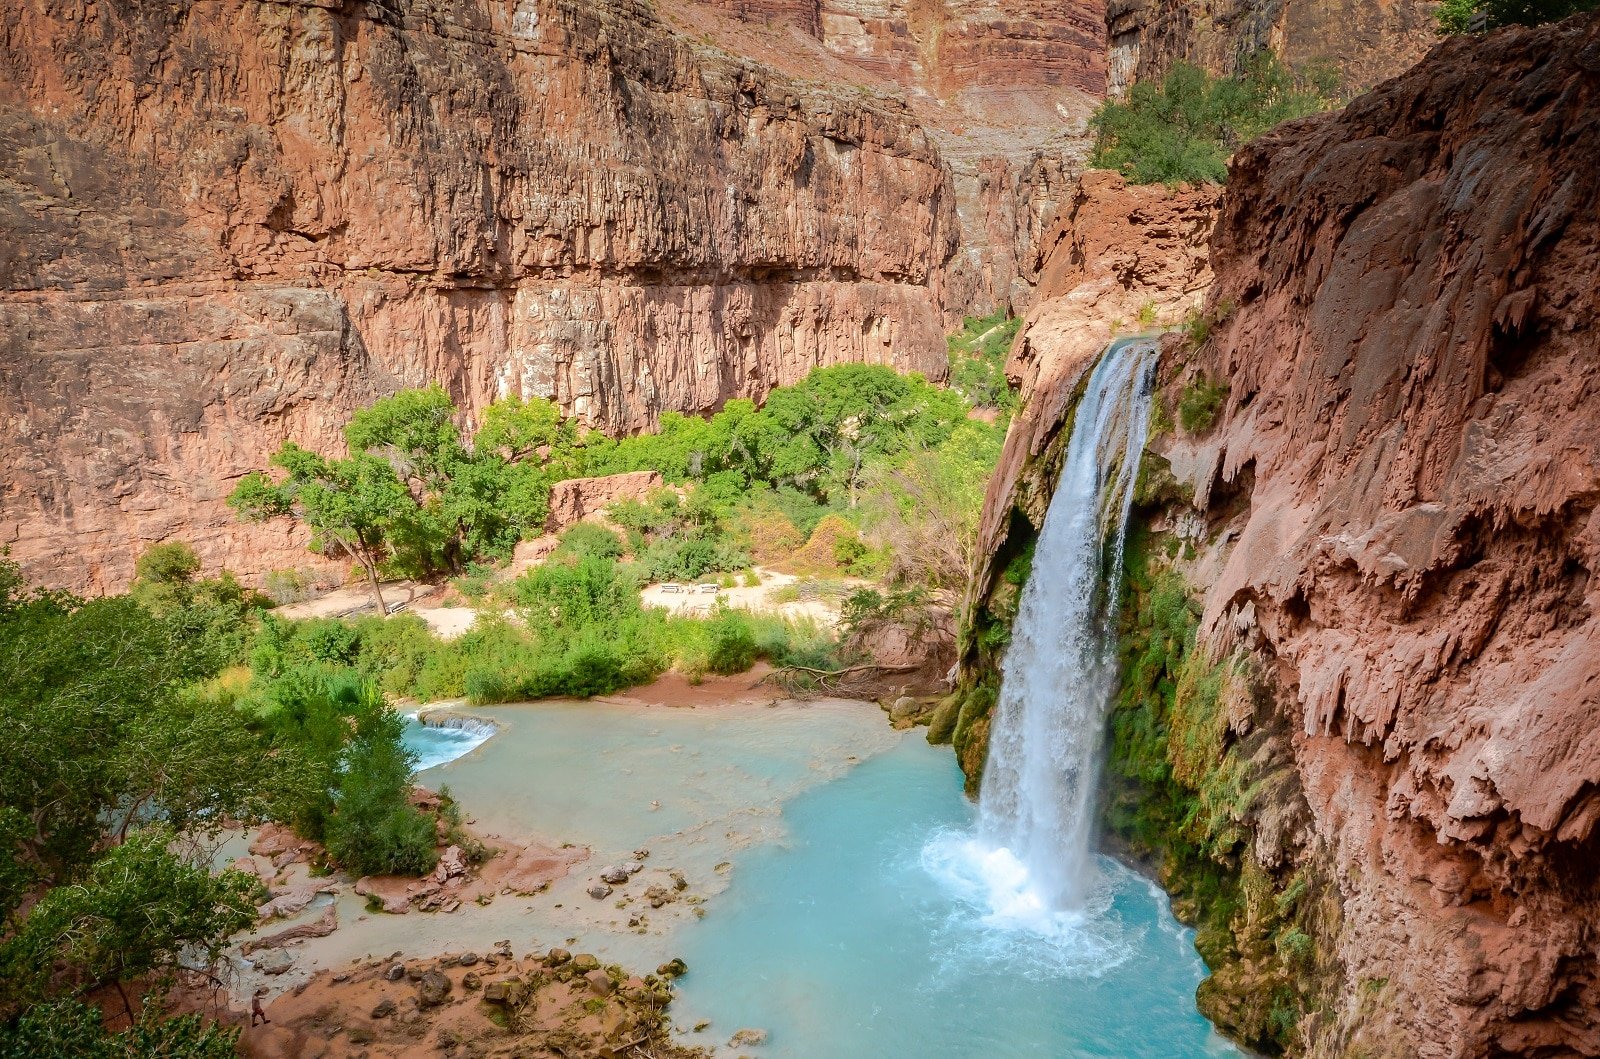 <p><span>Immerse yourself in the stunning beauty of Havasu Falls in the Grand Canyon, known for its vibrant blue-green waters set against red canyon walls. Part of the Havasupai Indian Reservation, this secluded waterfall offers a tranquil paradise for swimming and relaxation. The hike to Havasu Falls is challenging but rewarding, with several smaller waterfalls along the way. Be sure to plan and reserve your trip well in advance due to limited access and high demand.</span></p> <p><b>Insider’s Tip: </b><span>Make reservations well in advance as access is limited. </span></p> <p><b>When To Travel: </b><span>Spring and fall for ideal hiking conditions. </span></p> <p><b>How To Get There: </b><span>Hike from Hualapai Hilltop, which is reachable by car.</span></p>